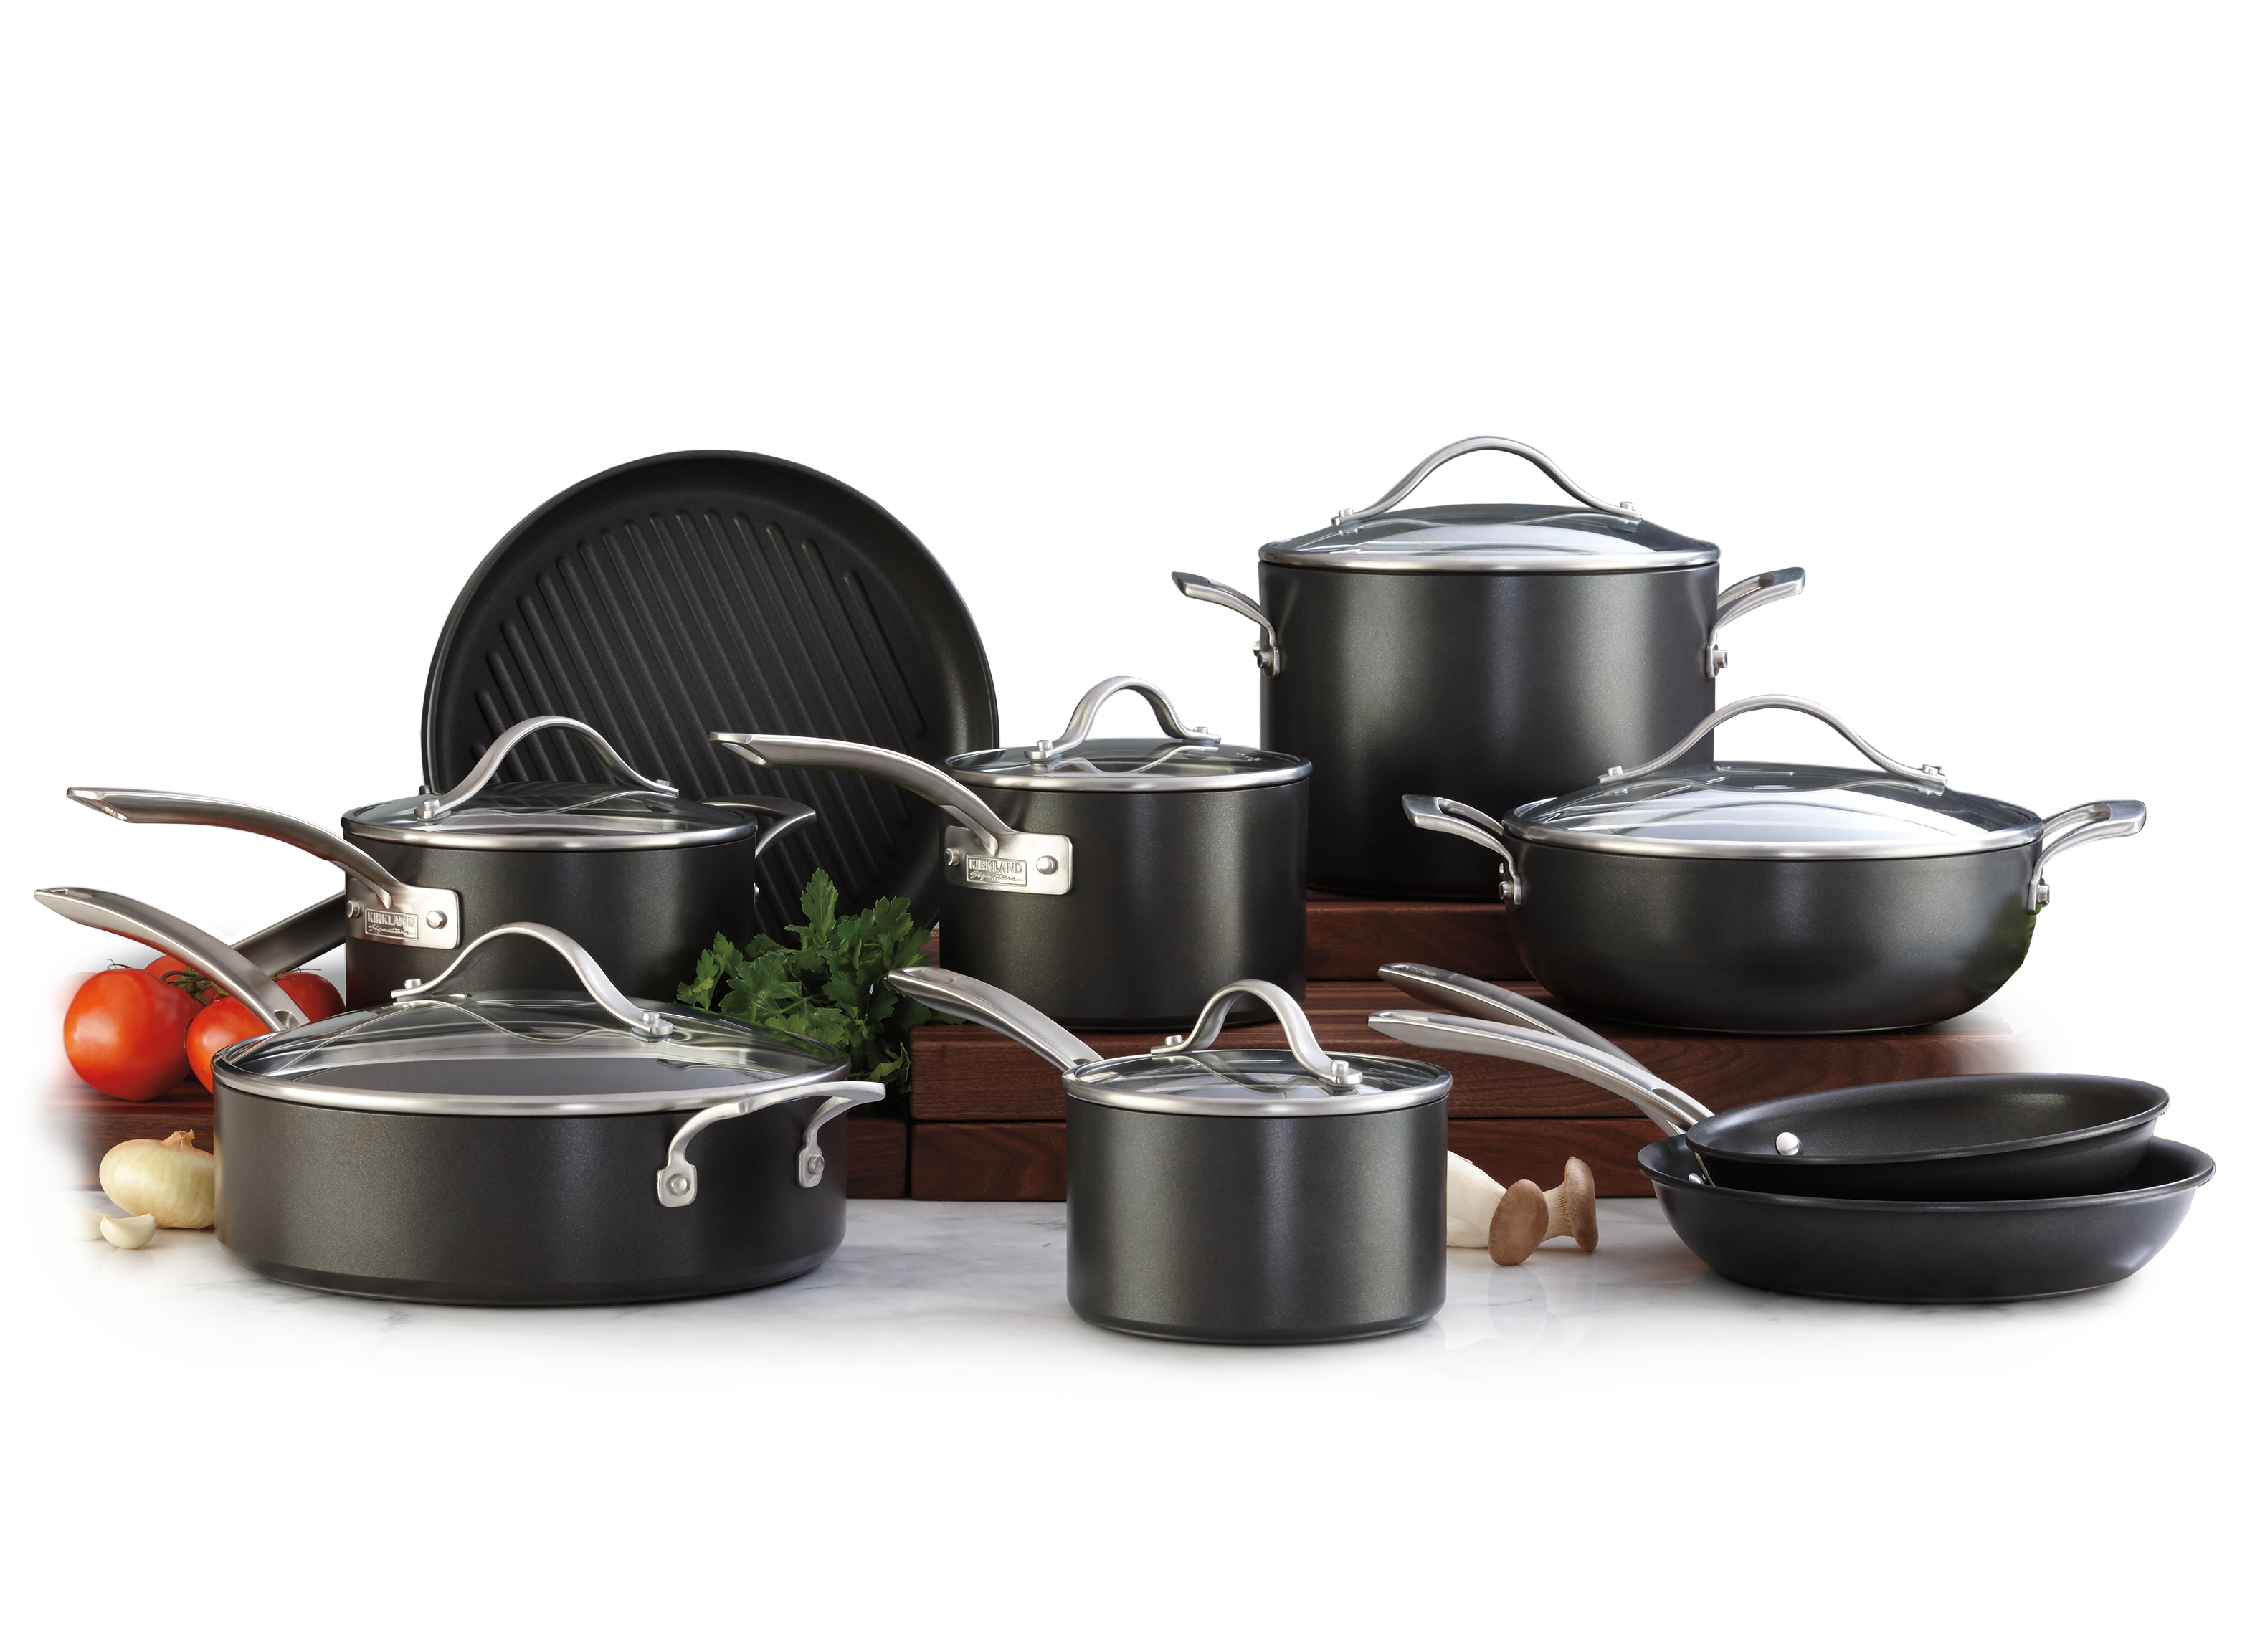 Kirkland Signature (Costco) Hard Anodized Cookware Review